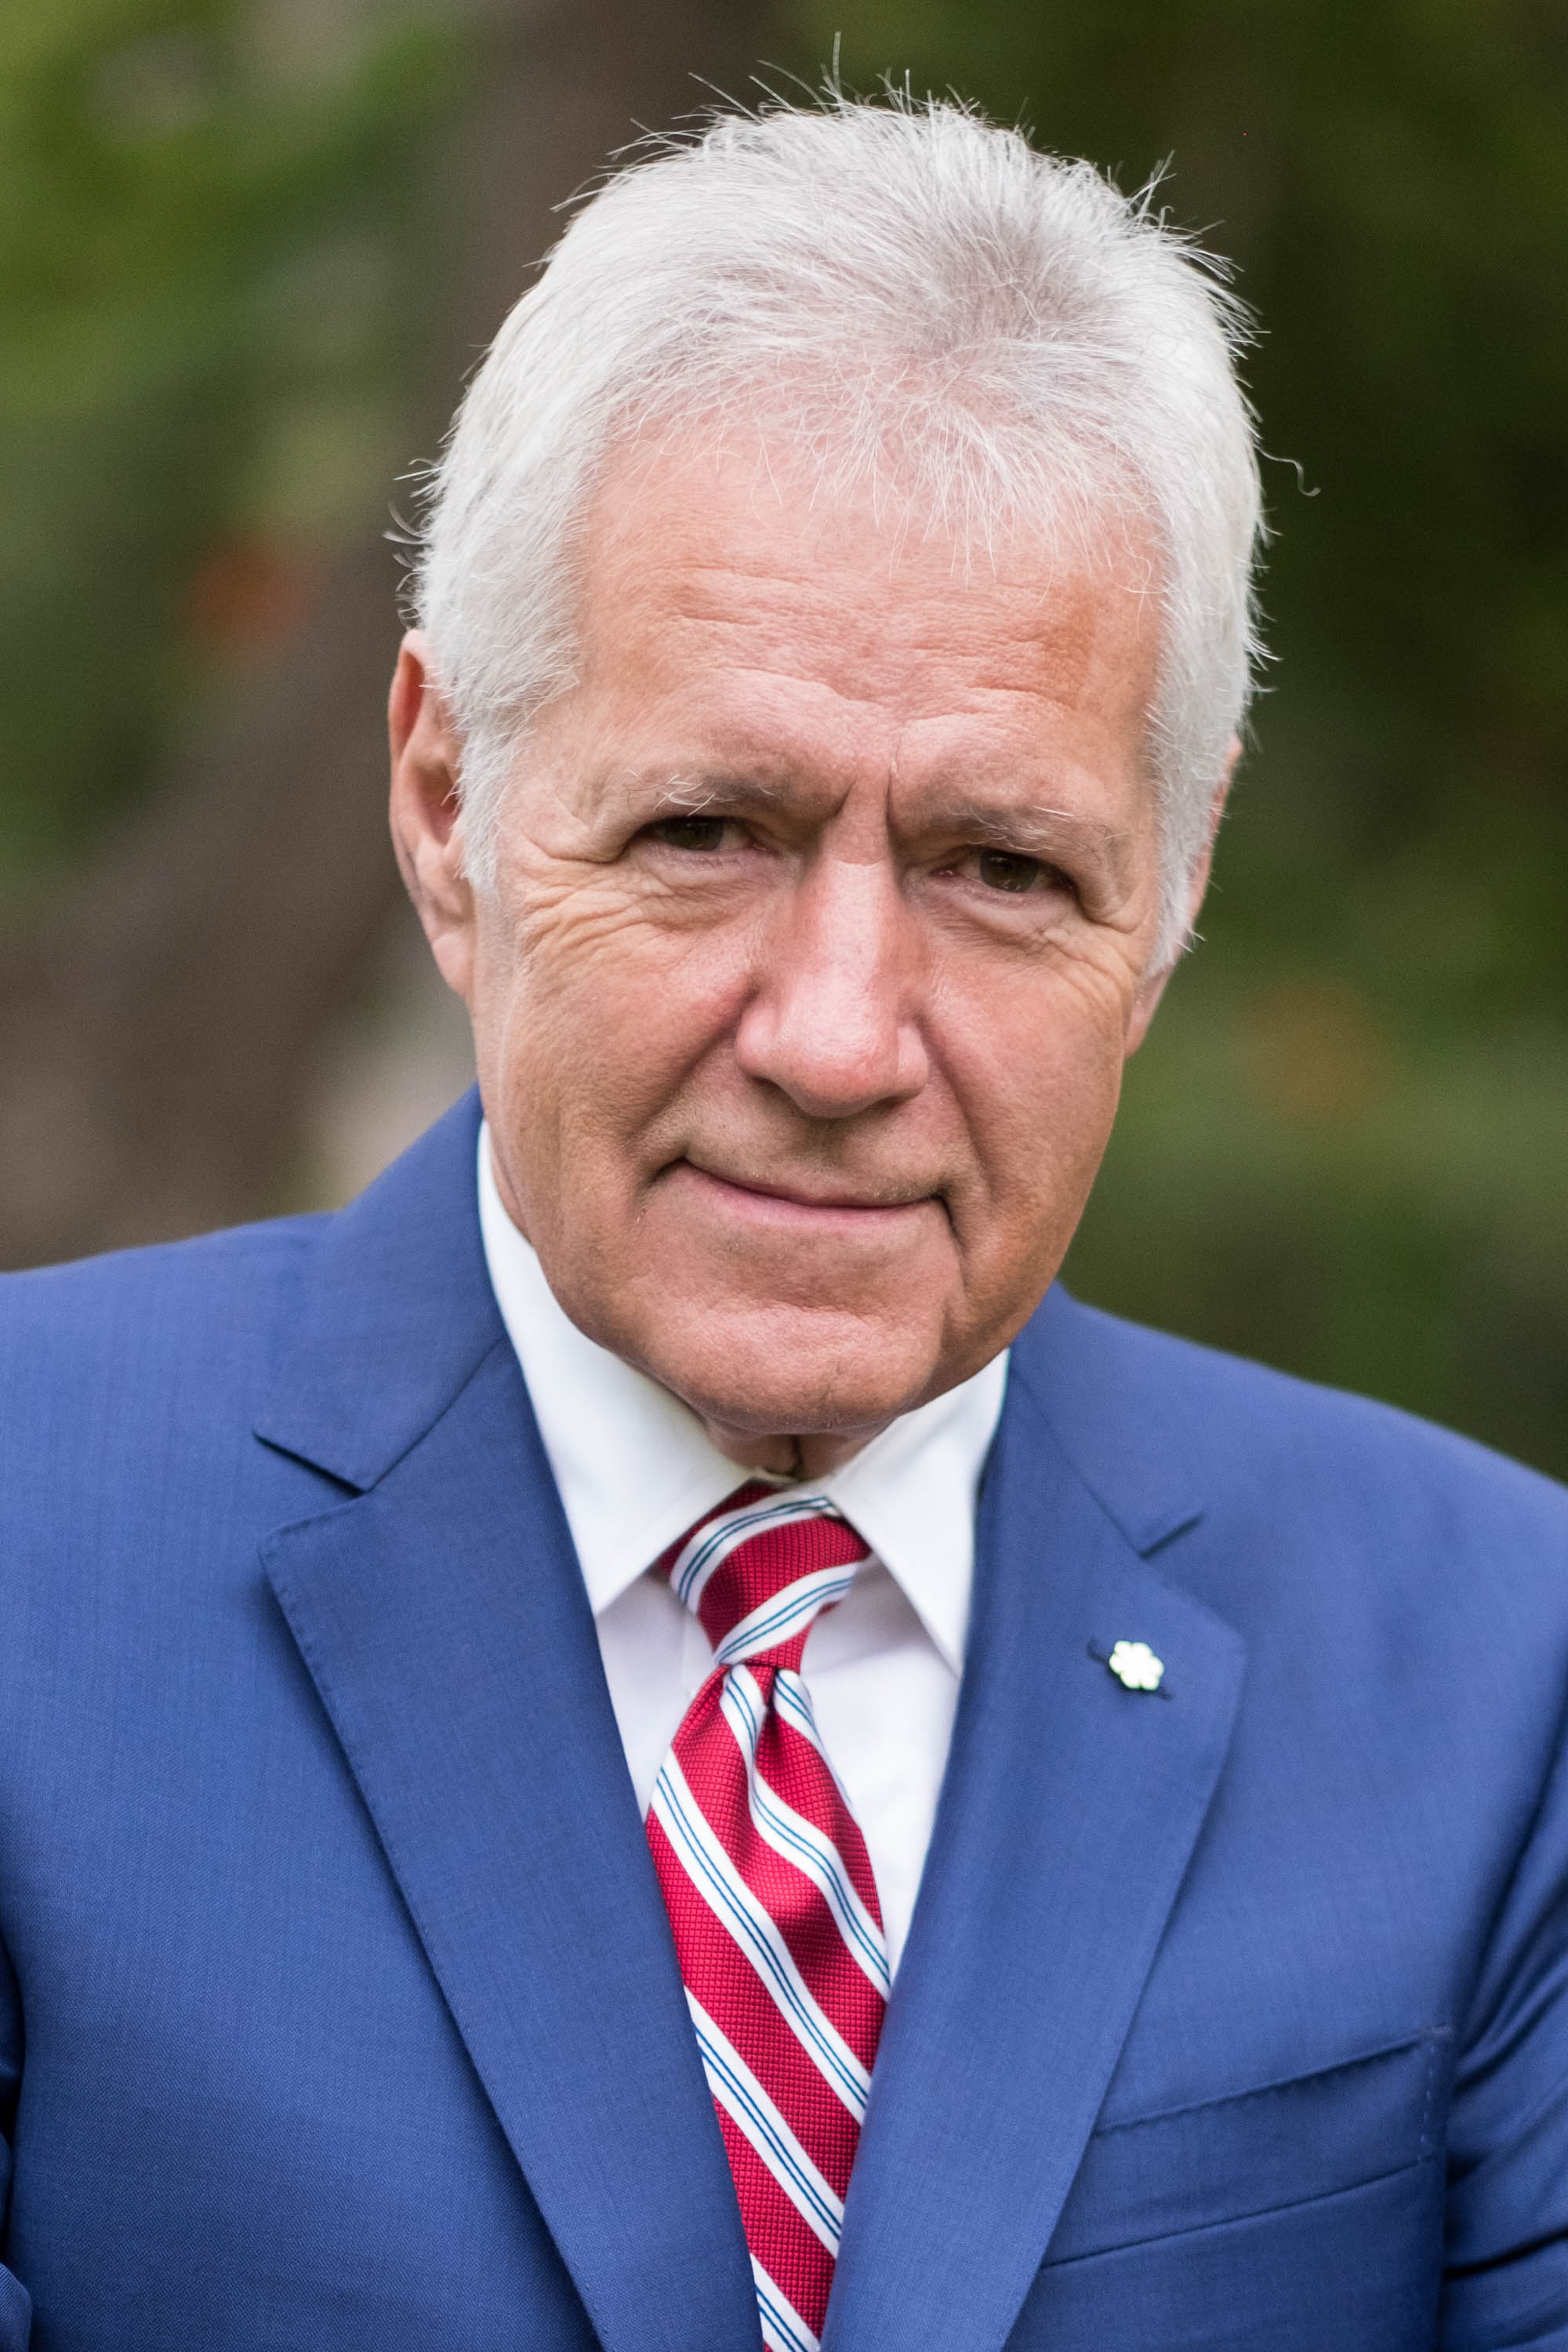 Alex Trebek attends the 150th anniversary of Canada's Confederation on June 30, 2017. | Source: Getty Images